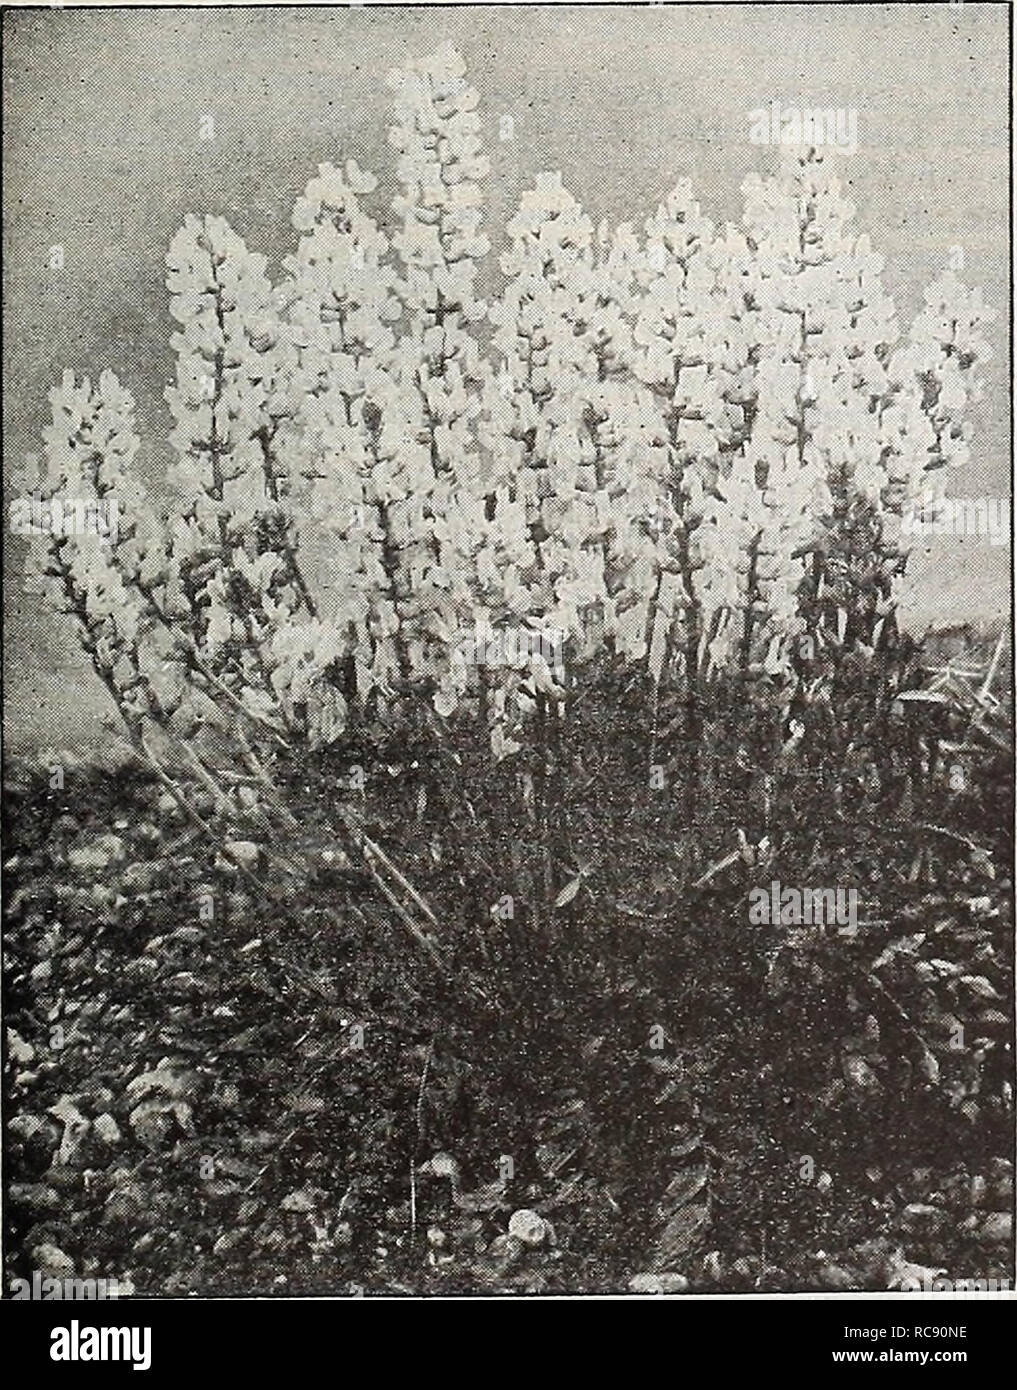 . Dreer's garden book 1917. Seeds Catalogs; Nursery stock Catalogs; Gardening Equipment and supplies Catalogs; Flowers Seeds Catalogs; Vegetables Seeds Catalogs; Fruit Seeds Catalogs. Oxytropis Hyerida Grandiflora MONTBRETIA CKllOtliera (Evening Primrose). The Evening Primroses are elegant sub- jects for growing in an exposed, sunny posi- tion, either in the border or on the rockery, blooming the greater part of the summer. Csespitosa. Large, pure white, changing Monarda Didyma to rose; 1 foot- Missouriensis. Large golden yellow; 1 foot. Pilgrimi. Large clusters of bright yellow flowers. Speci Stock Photo